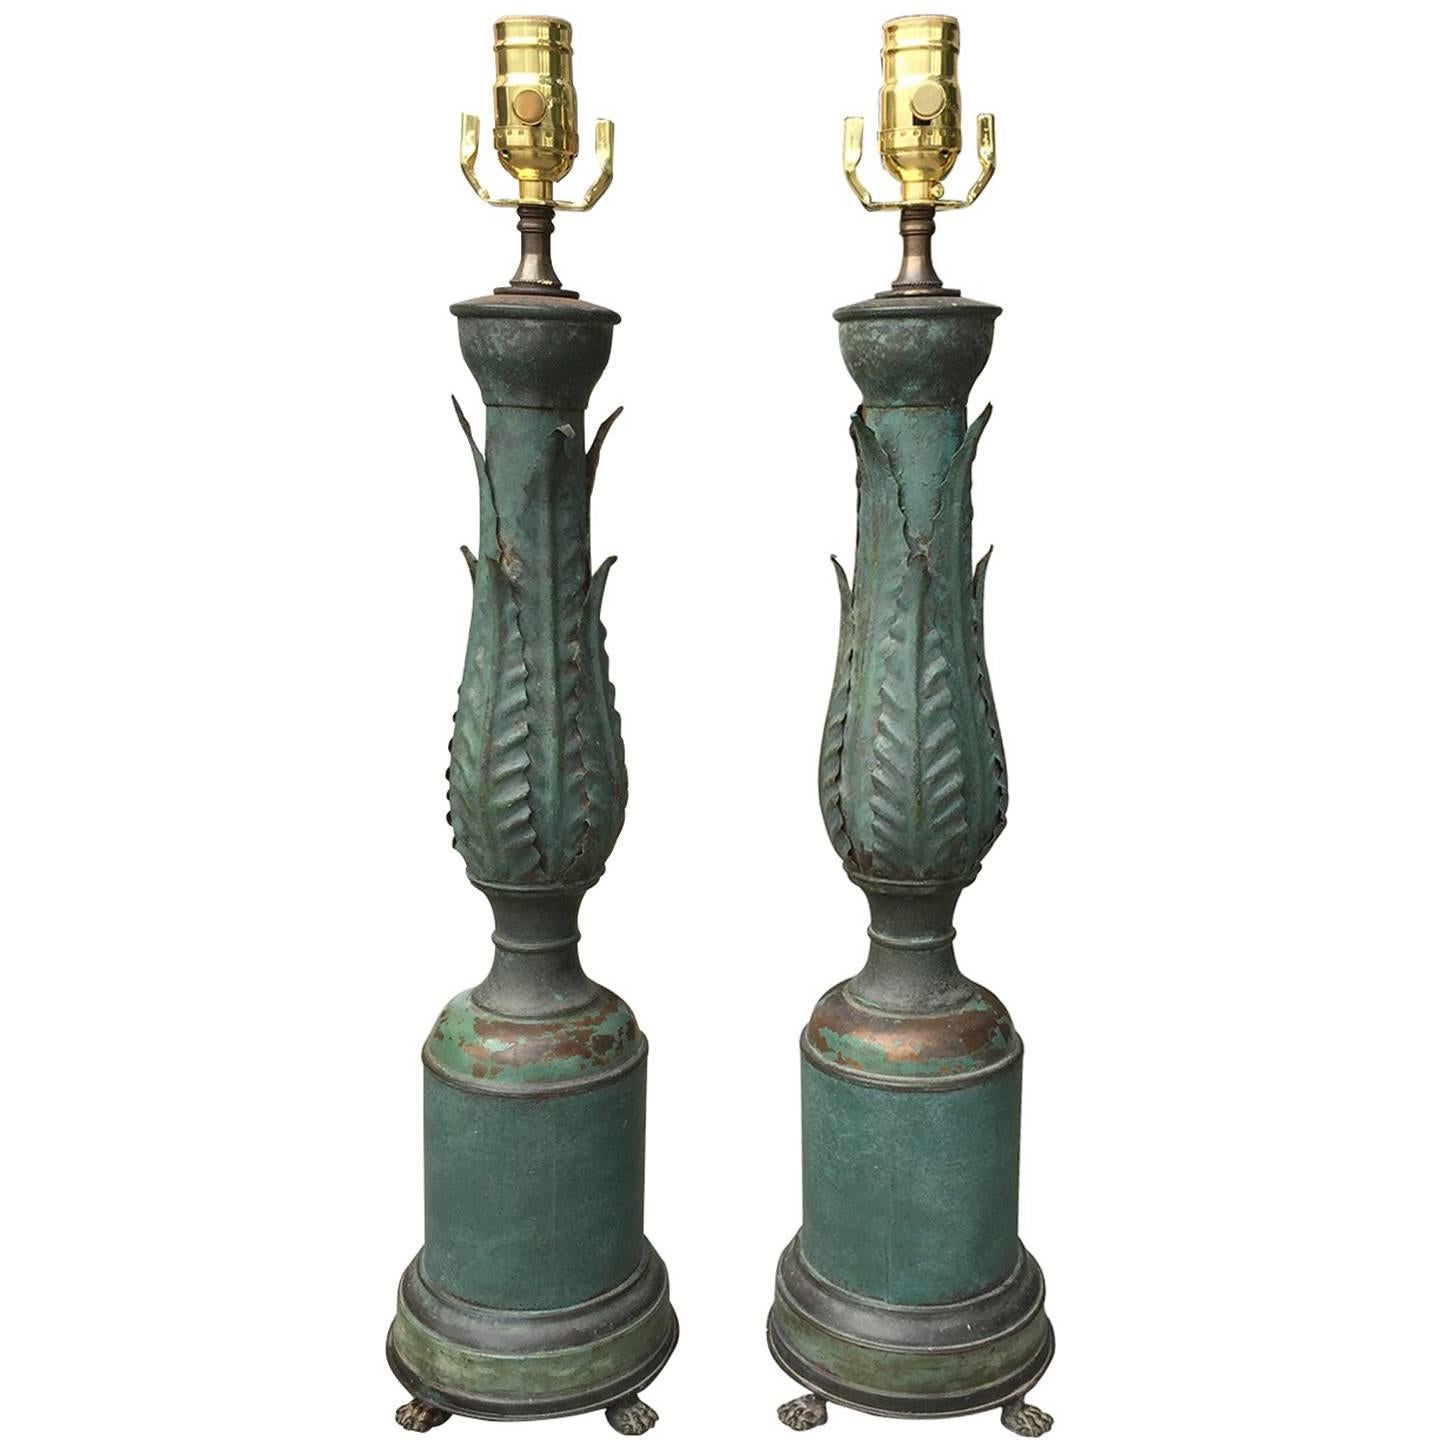 Pair of 1920s Neoclassical Tole Lamps with Acanthus Leaves and Lion Paw Feet